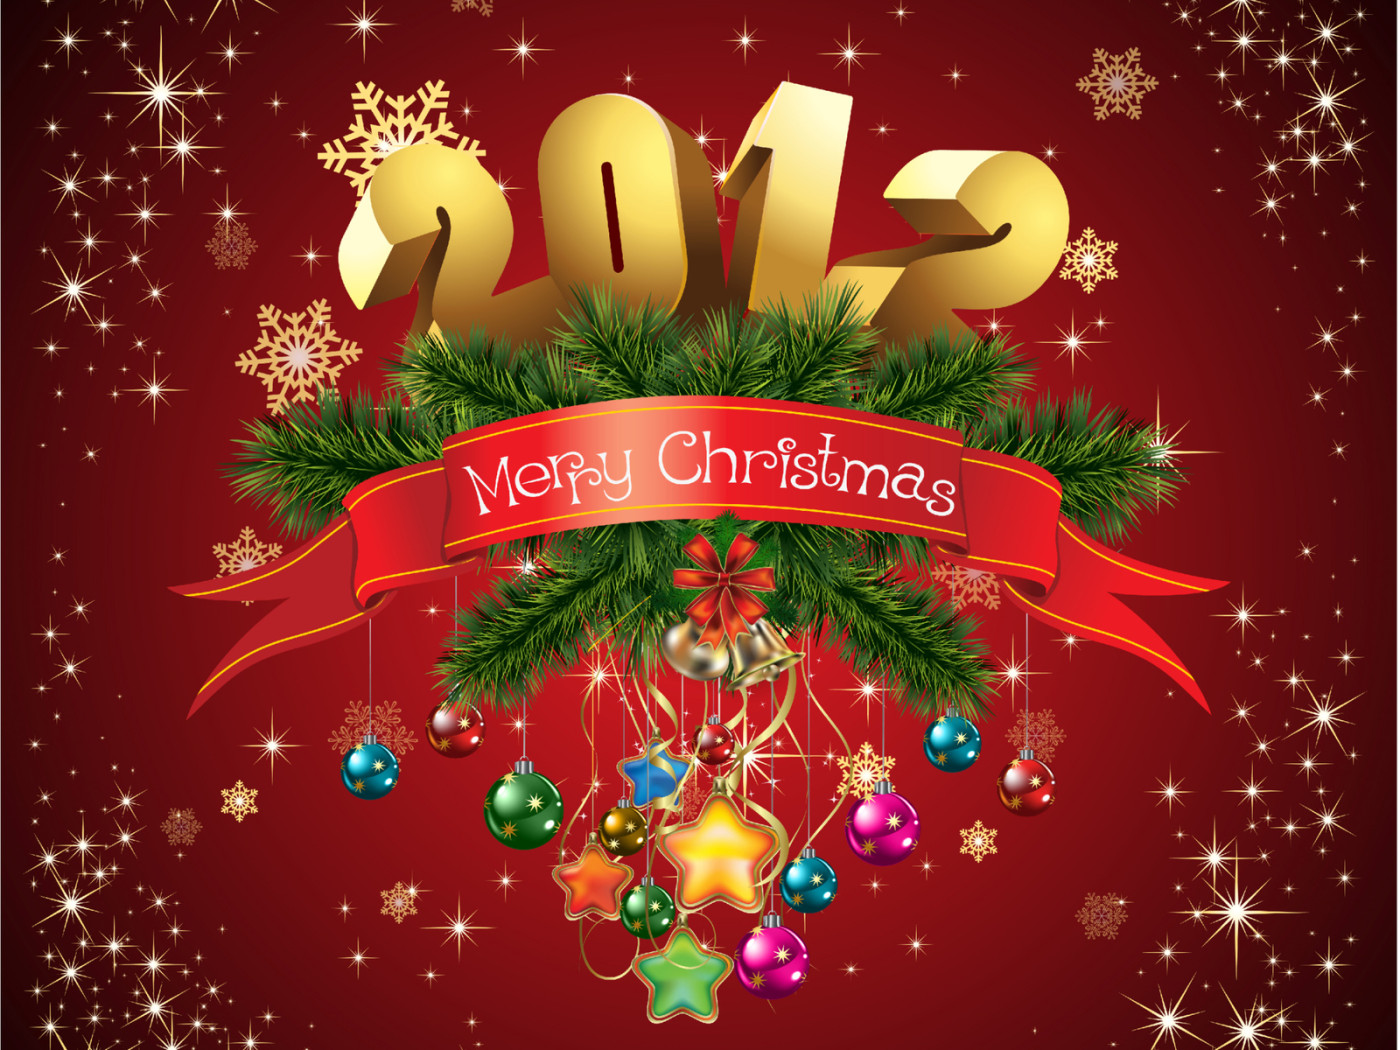 New Year 2012 High Quality Images and Wallpapers-13 1